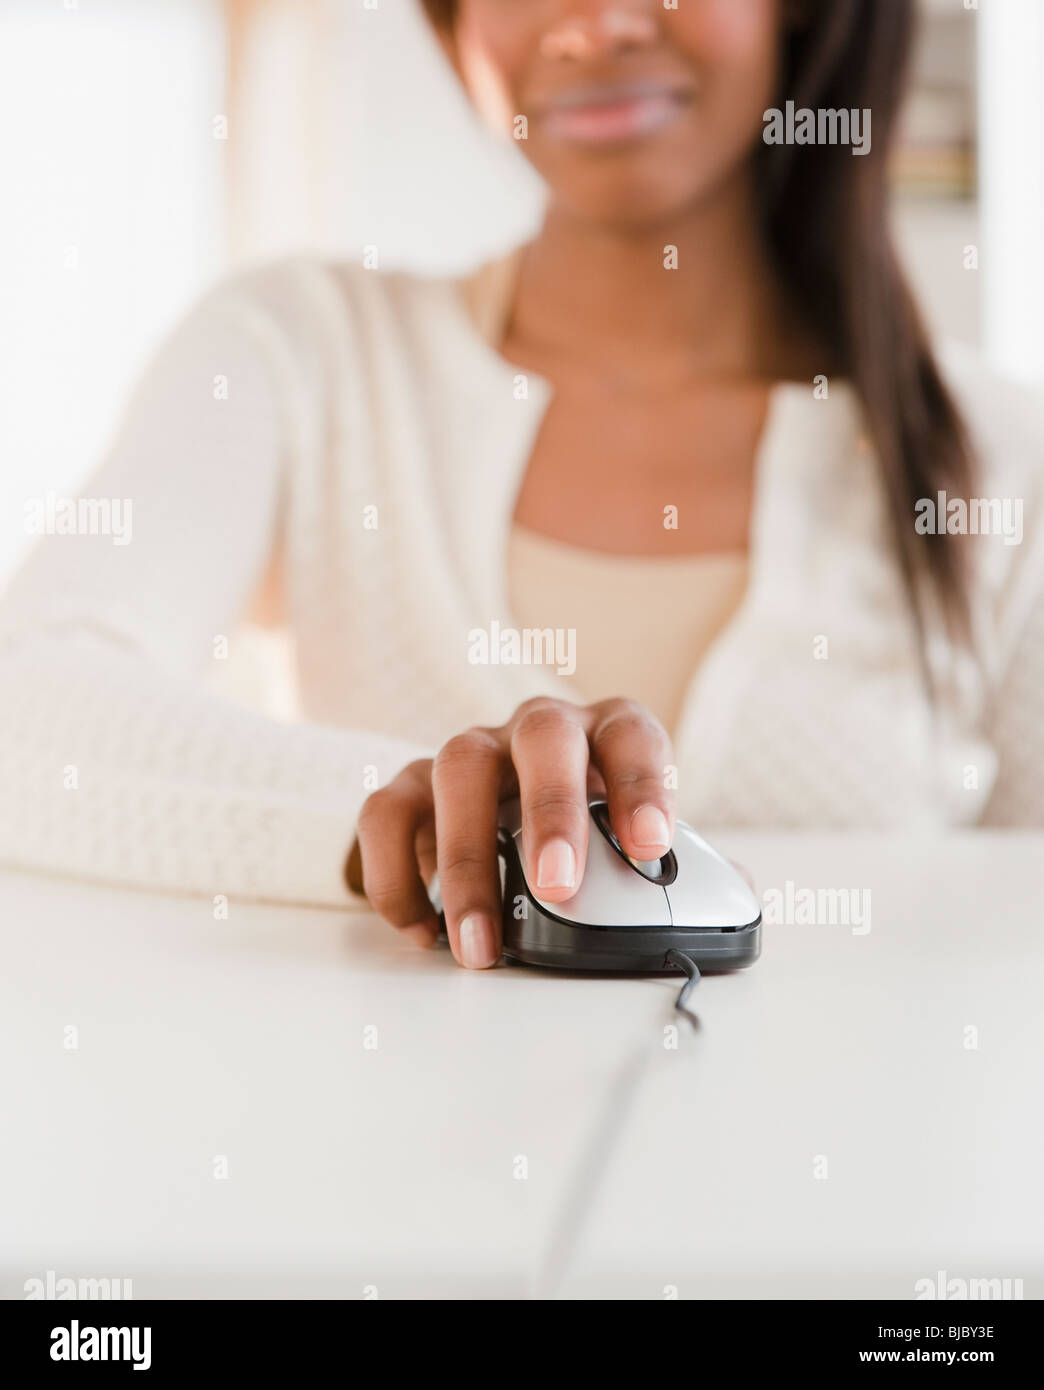 Mixed race woman using computer mouse Stock Photo